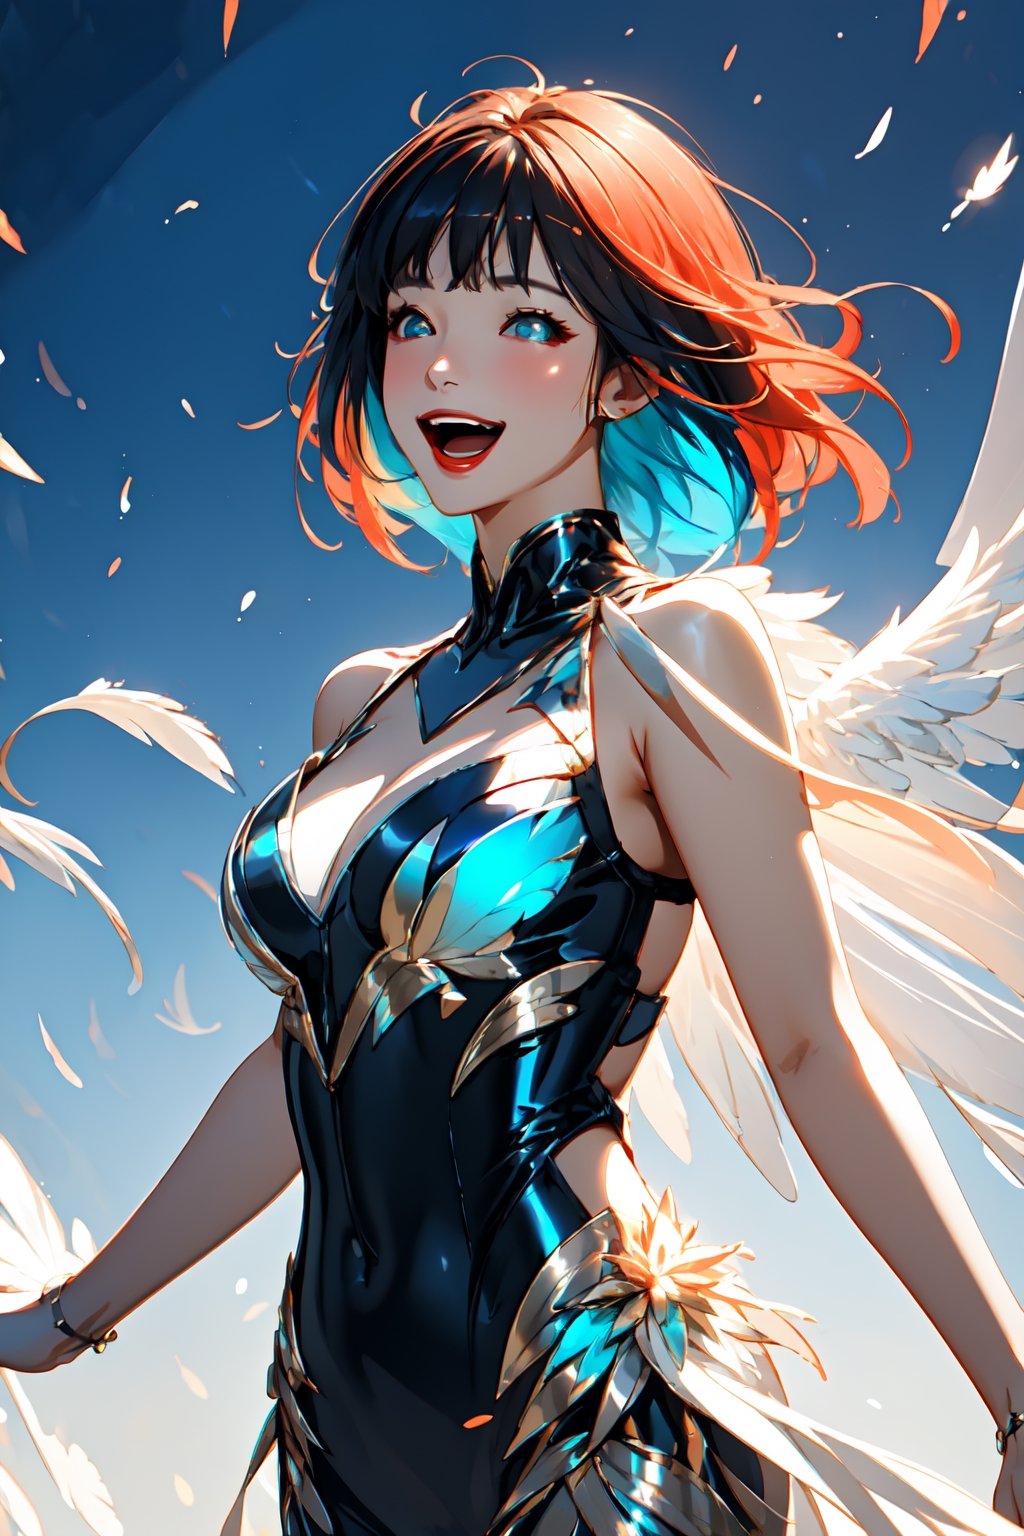 (Very beautiful cute girl like an angel), Beautiful detailed eyes, Detailed double eyelids, (Cute eyes,sleepy eyes,), Short detailed hair See-through bangs, Breasts sharp focus, Beautiful detailed face and eyes, Droopy eyes, BREAK (Super Gloss Metallic Coral Aqua Transparent Holographic Suit: 1.5), (Super Tight Fit Holographic Suit, Super Reflective Surface: 1.5), (Super Tight Fit Holographic Suit: 1.5), (Super Reflective Holographic Suit: 1.5) , (Standing height: 1.5), Small nose, (Busty chest: 1.3), (Open mouth and sleepy eyes smiling happily: 1.5), Permanent, ((fluorescent multicolored hair:1.5) and short details) ), Beautiful legs, (Best quality: 1.2), Raw photo, High resolution, Perfect details, Professional photography, Professional lighting, Strong lighting on the bodysuit, Outdoor photography, Long legs,phaser_dancing